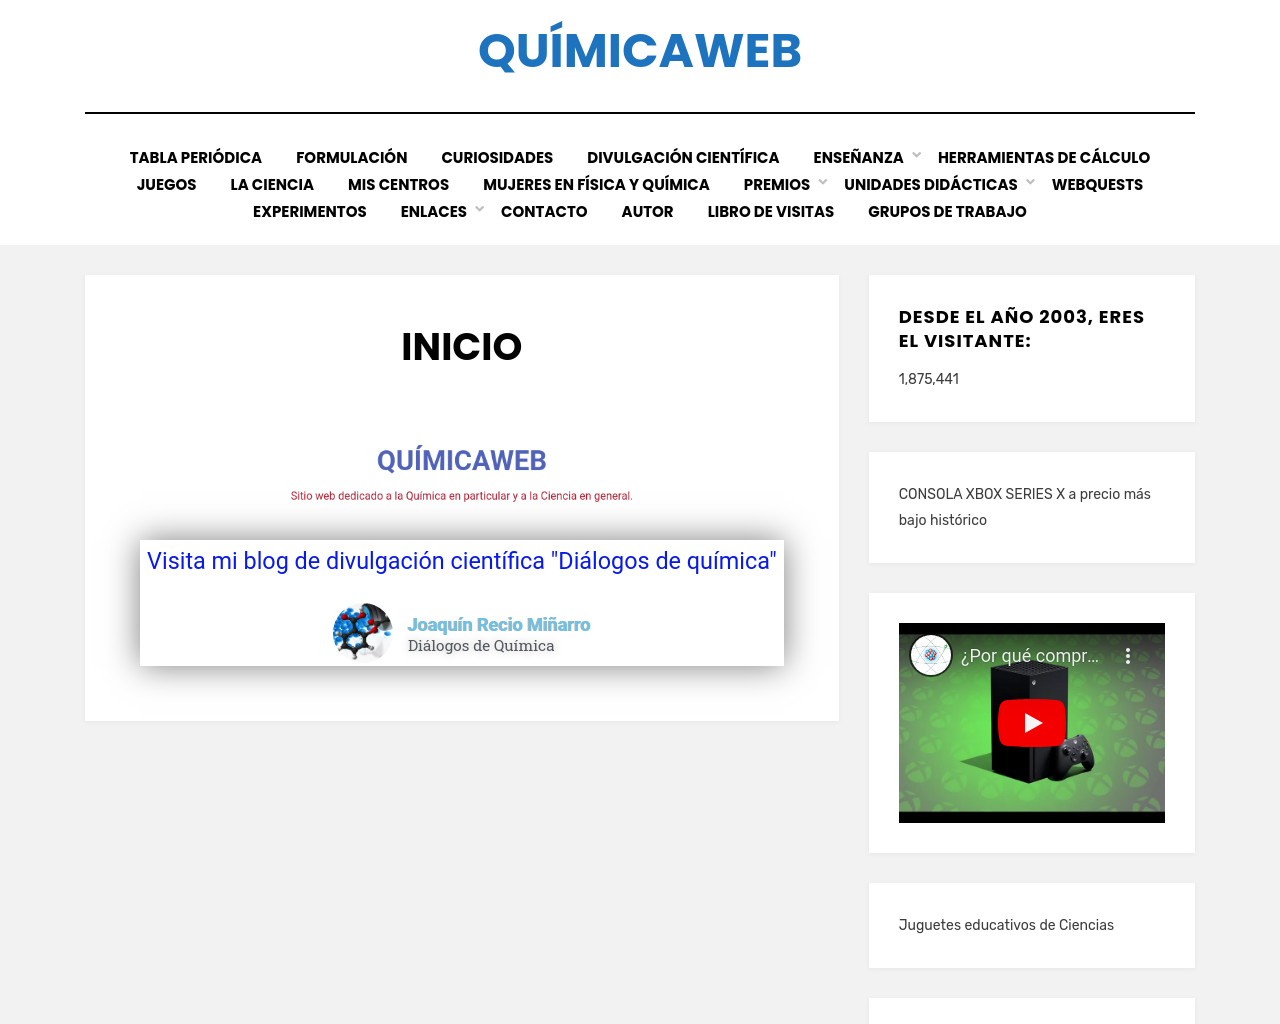 quimicaweb.net